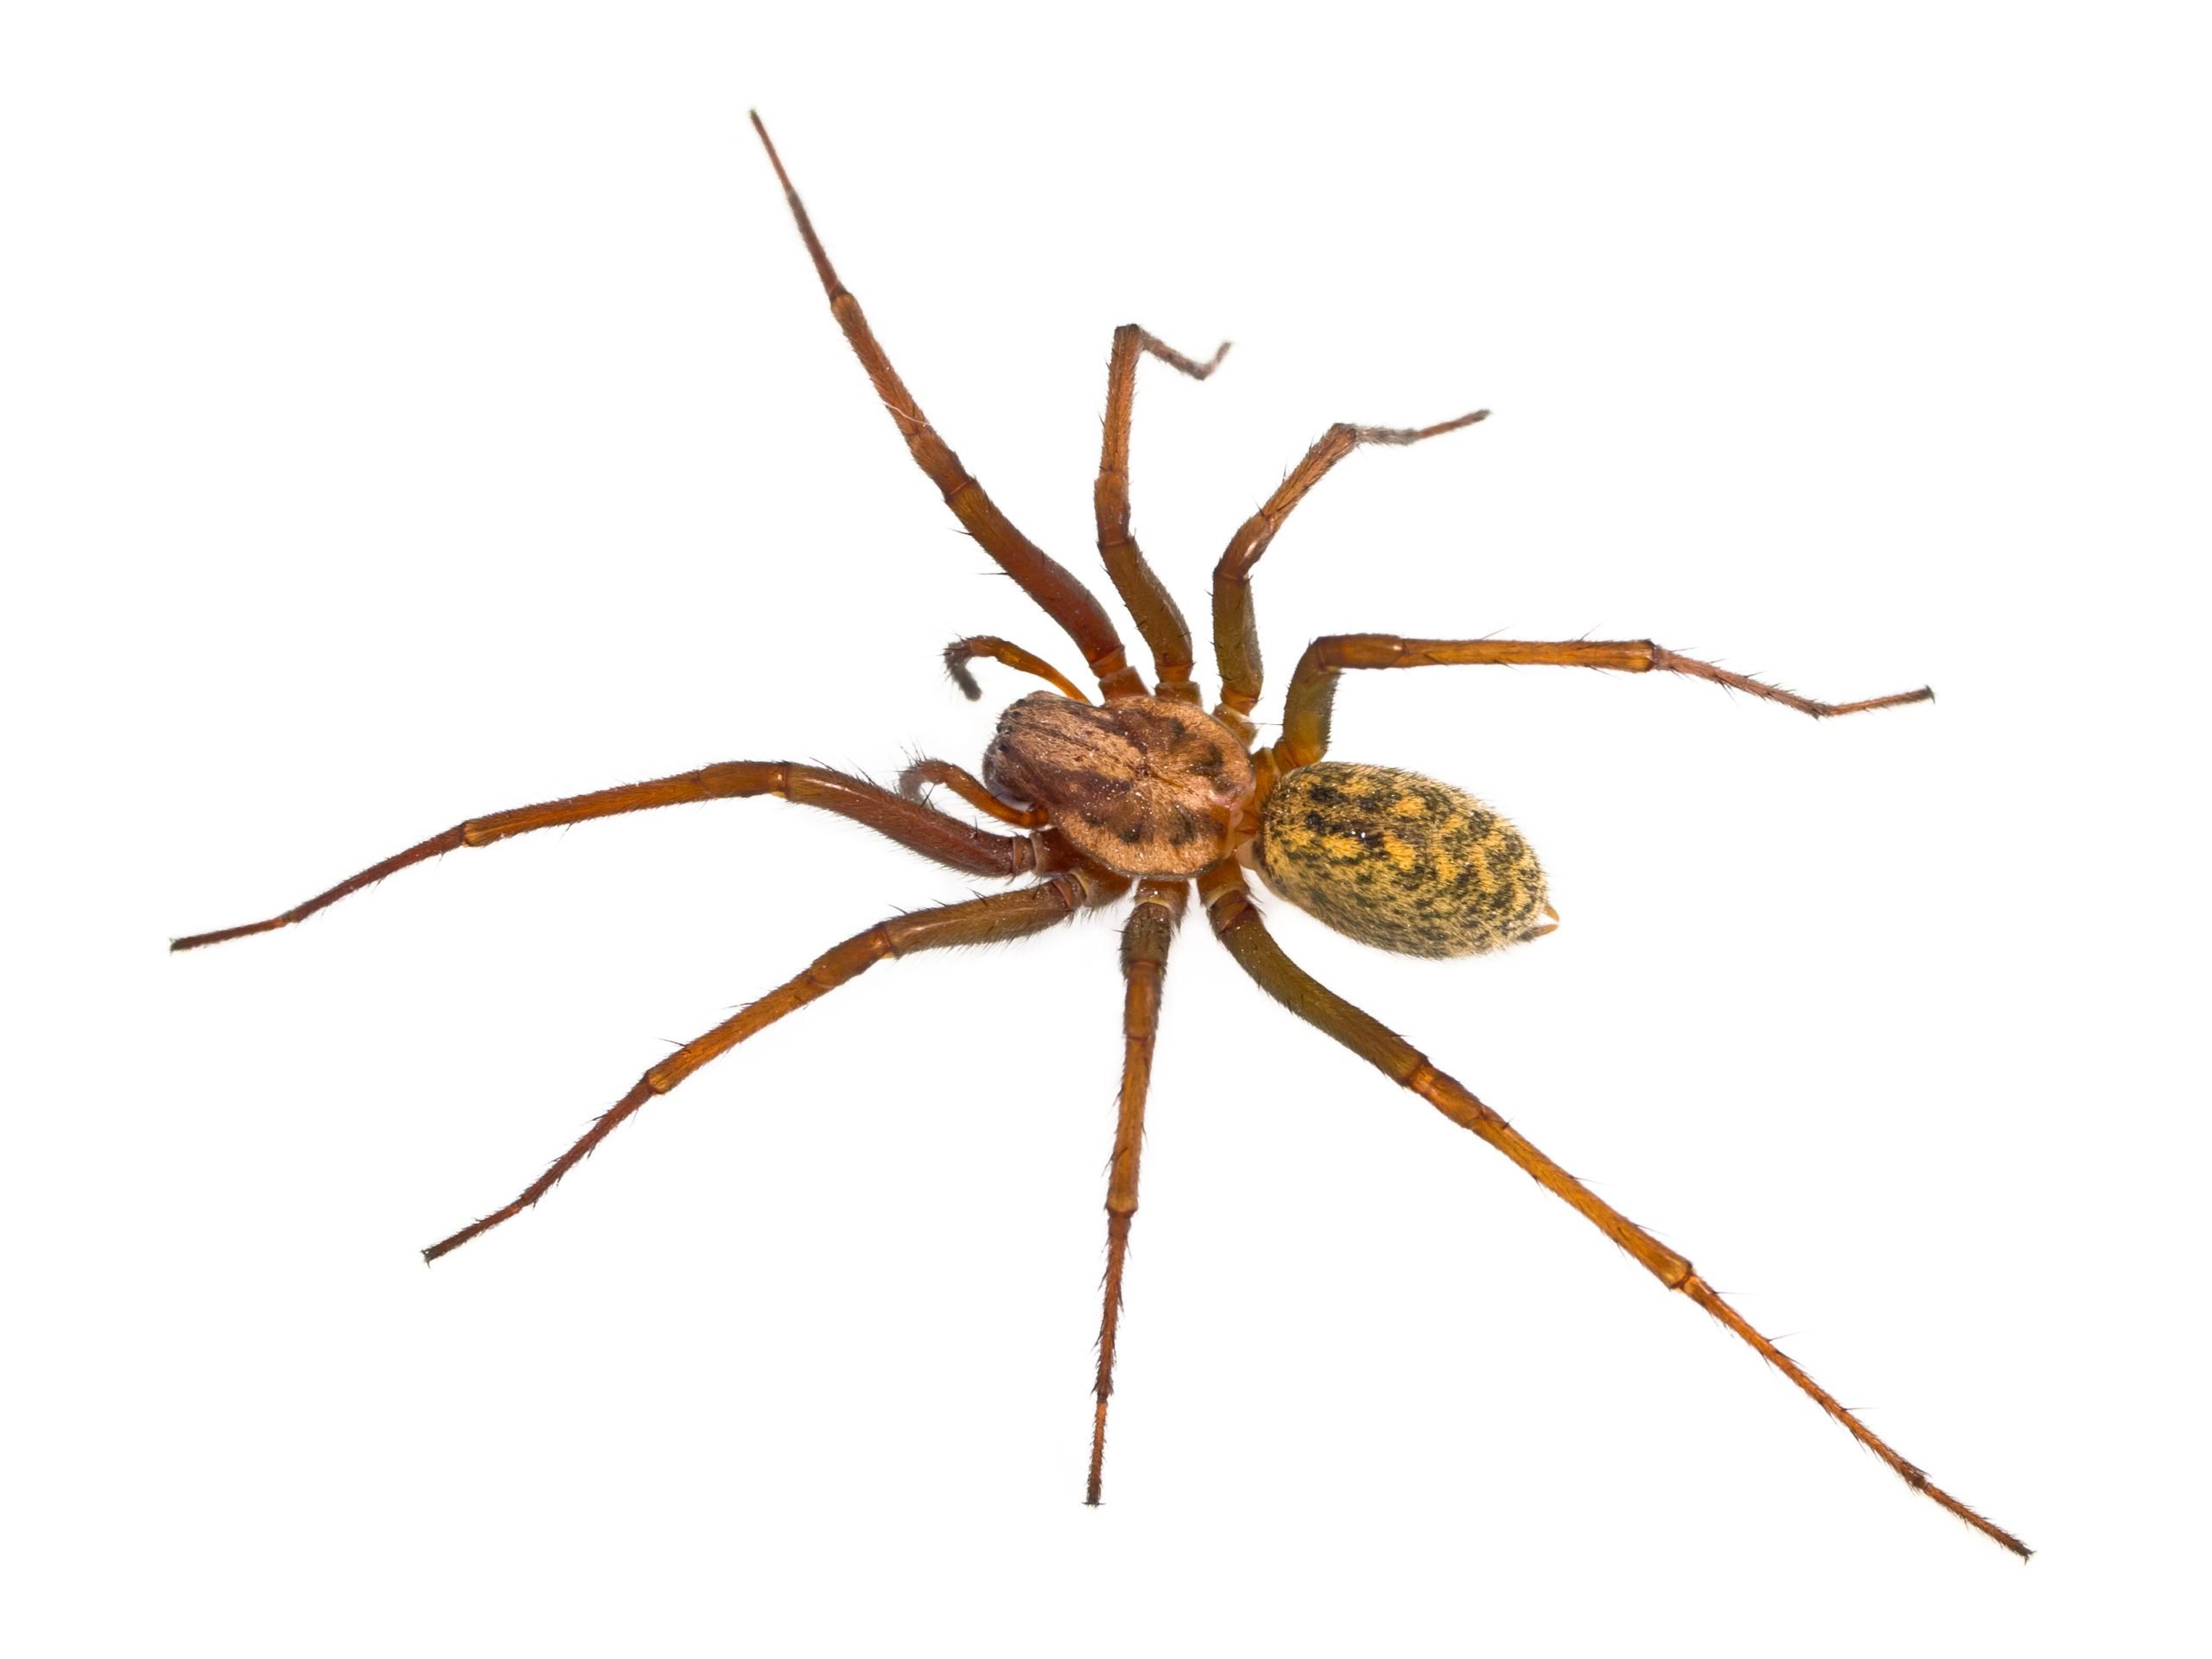 Hobo Spider Bites: Everything You Need to Know